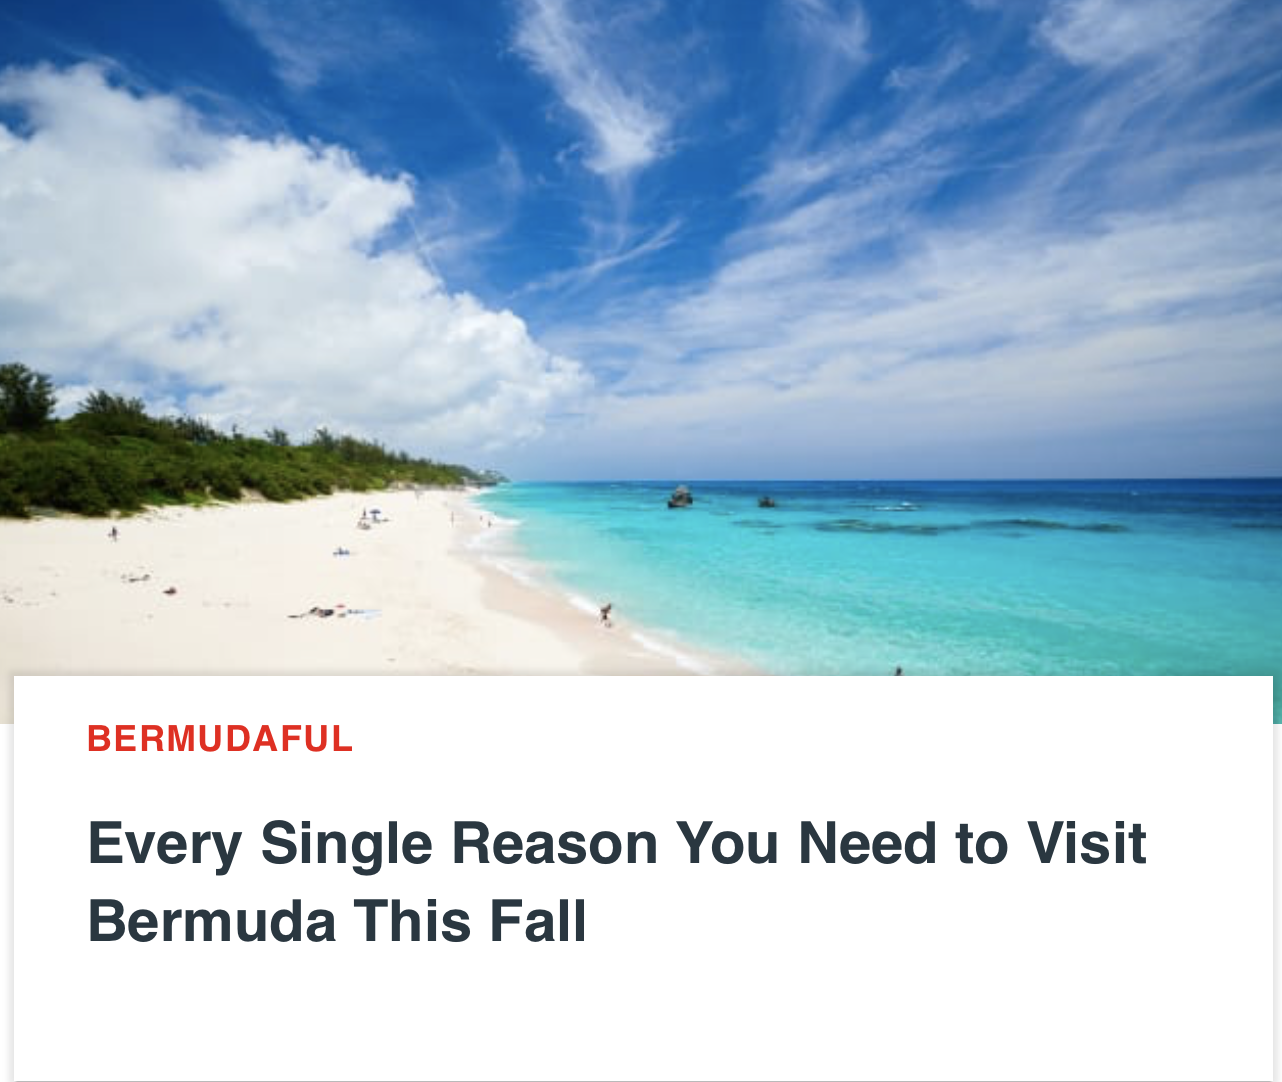 Daily Beast: Every Single Reason You Need to Visit Bermuda This Fall